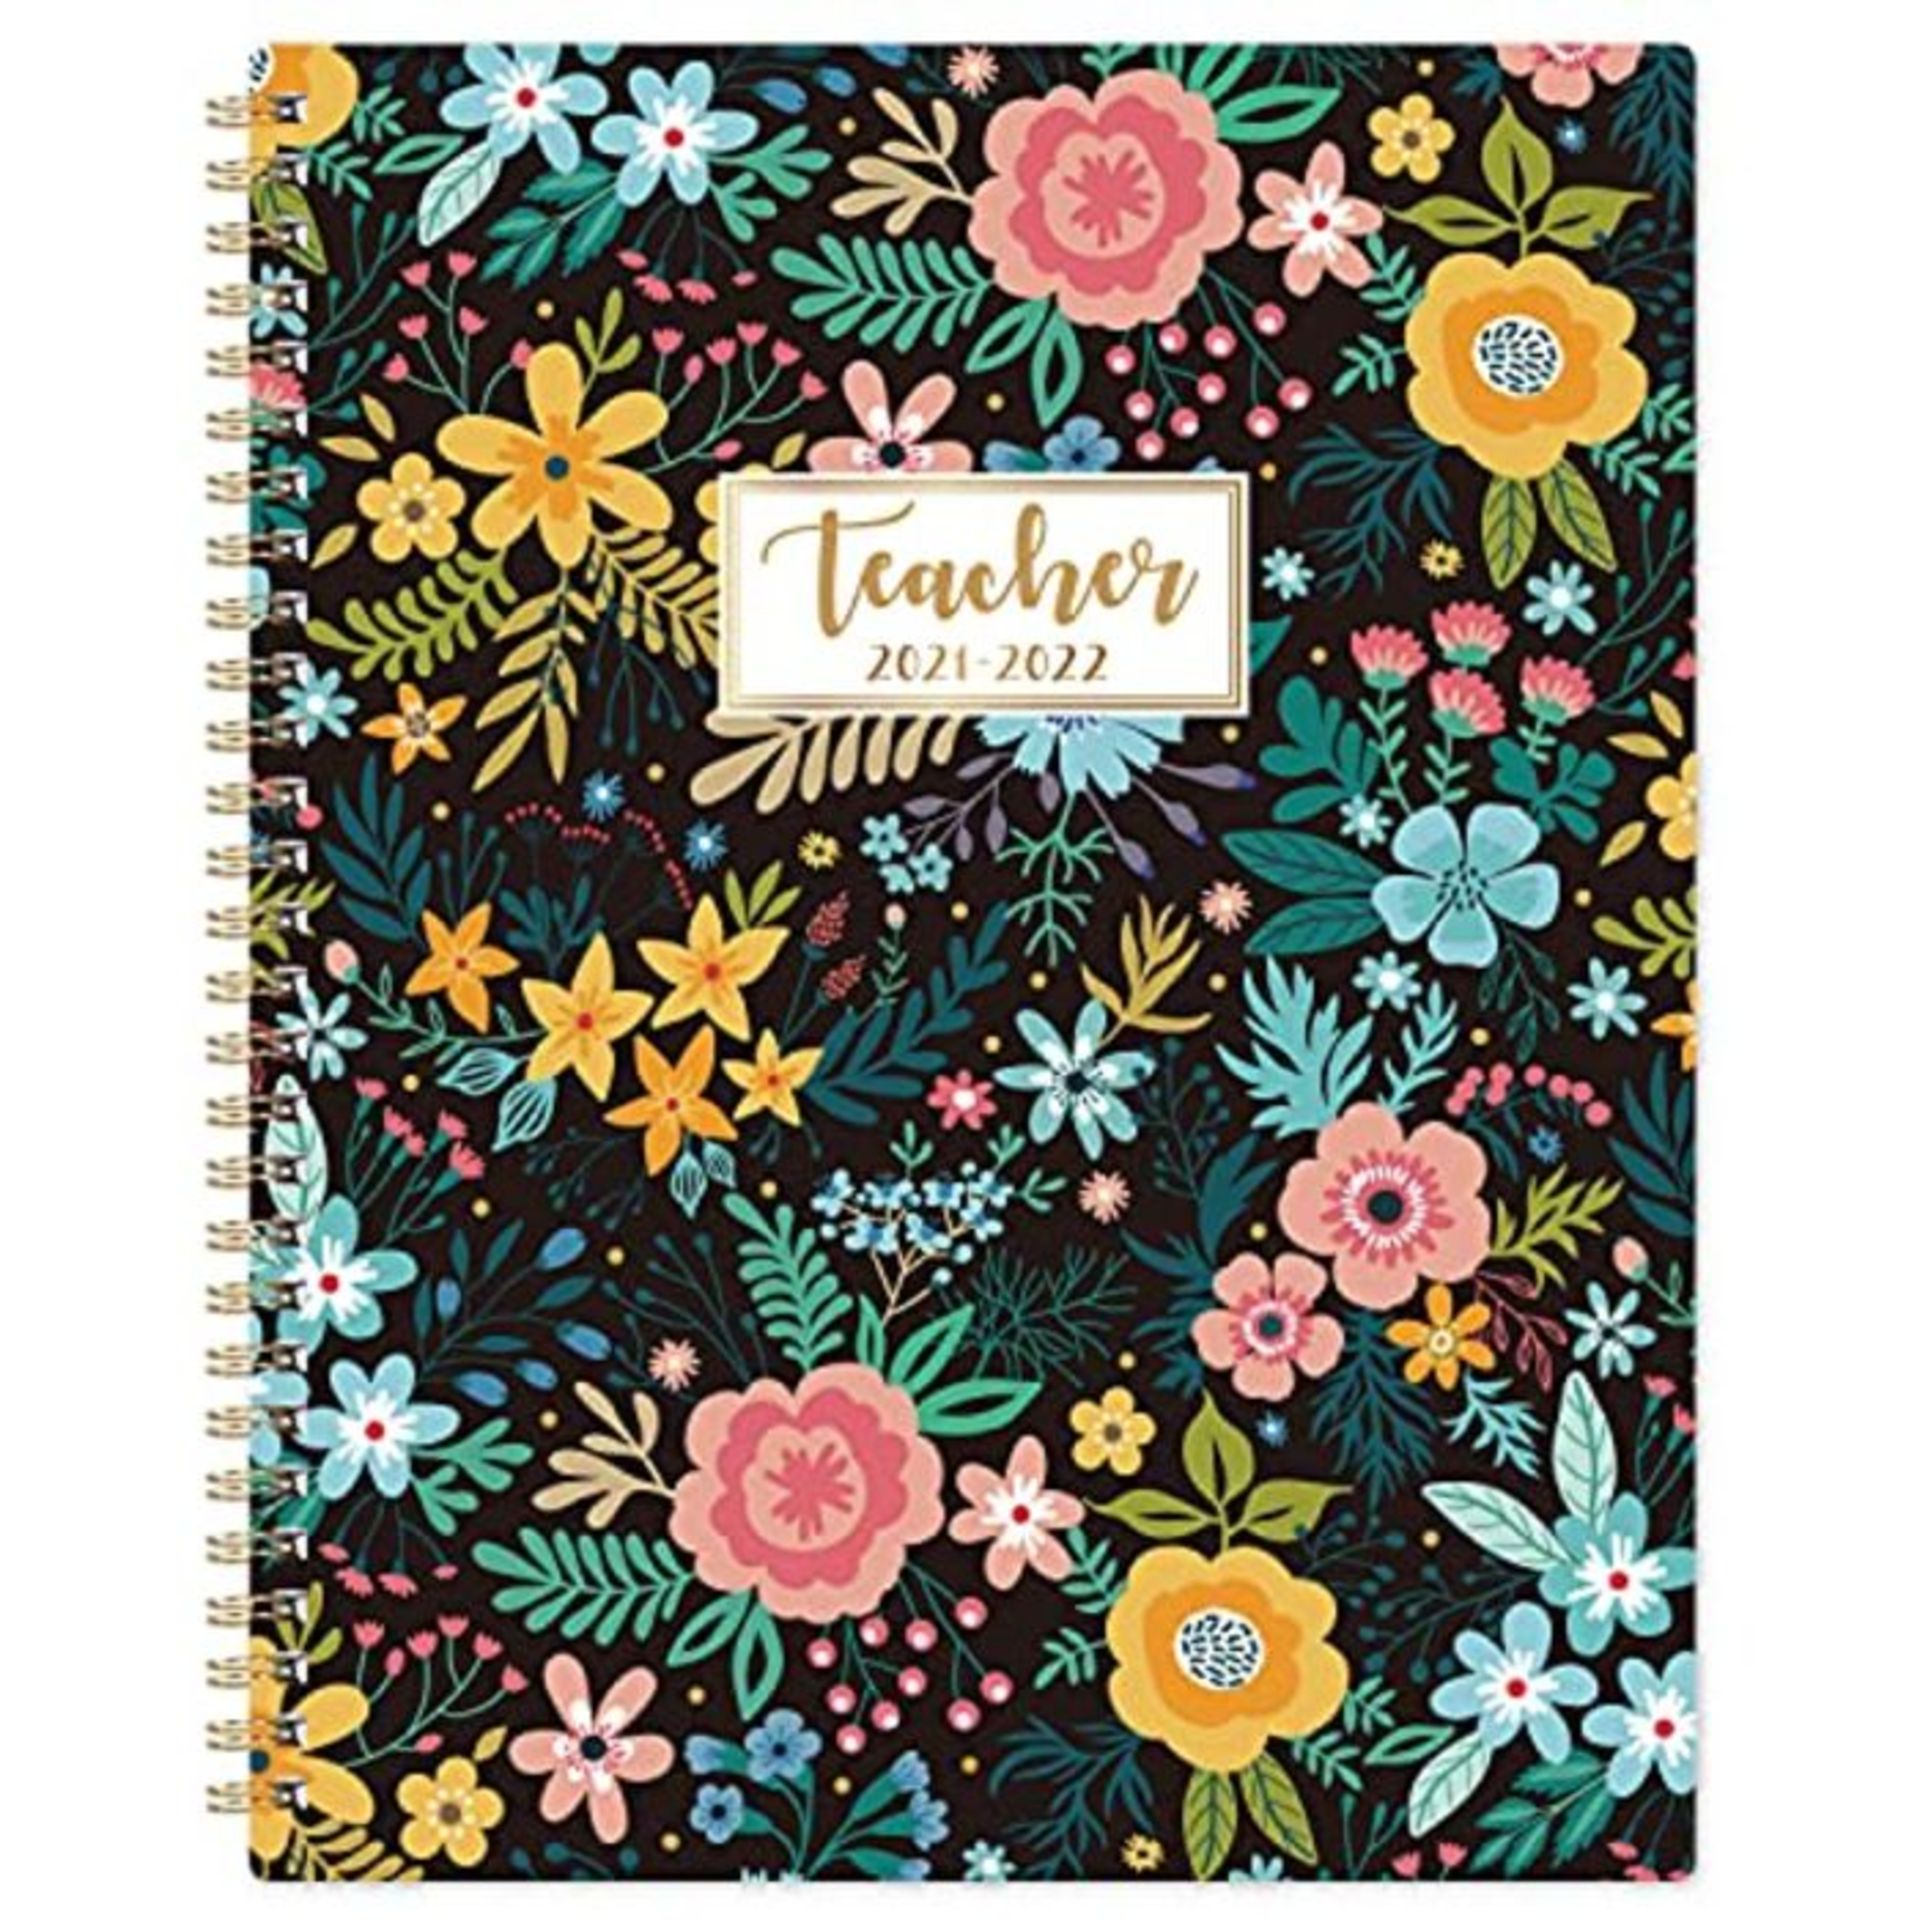 Teacher Planner 2021 2022 - Academic Planner for Teachers with Monthly Tabs, 8 x 10 In